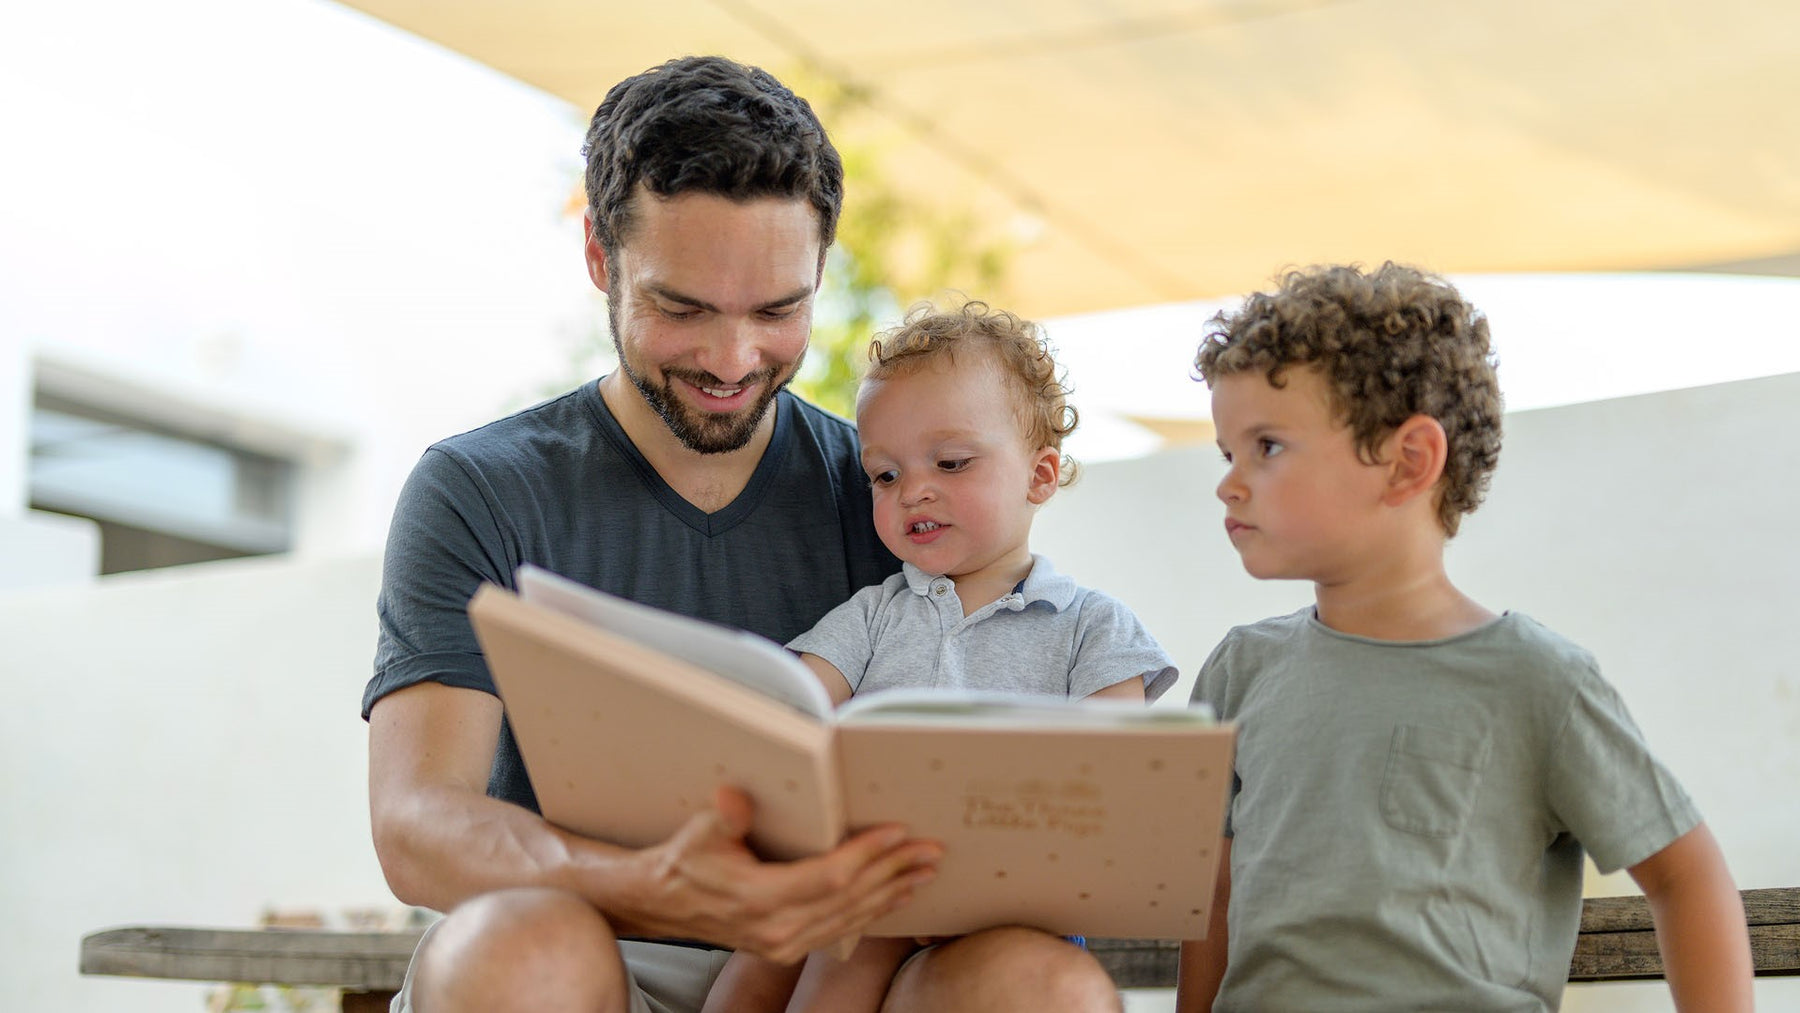 A Dad is reading a book to his two children. Fun, educational, activities for kids.